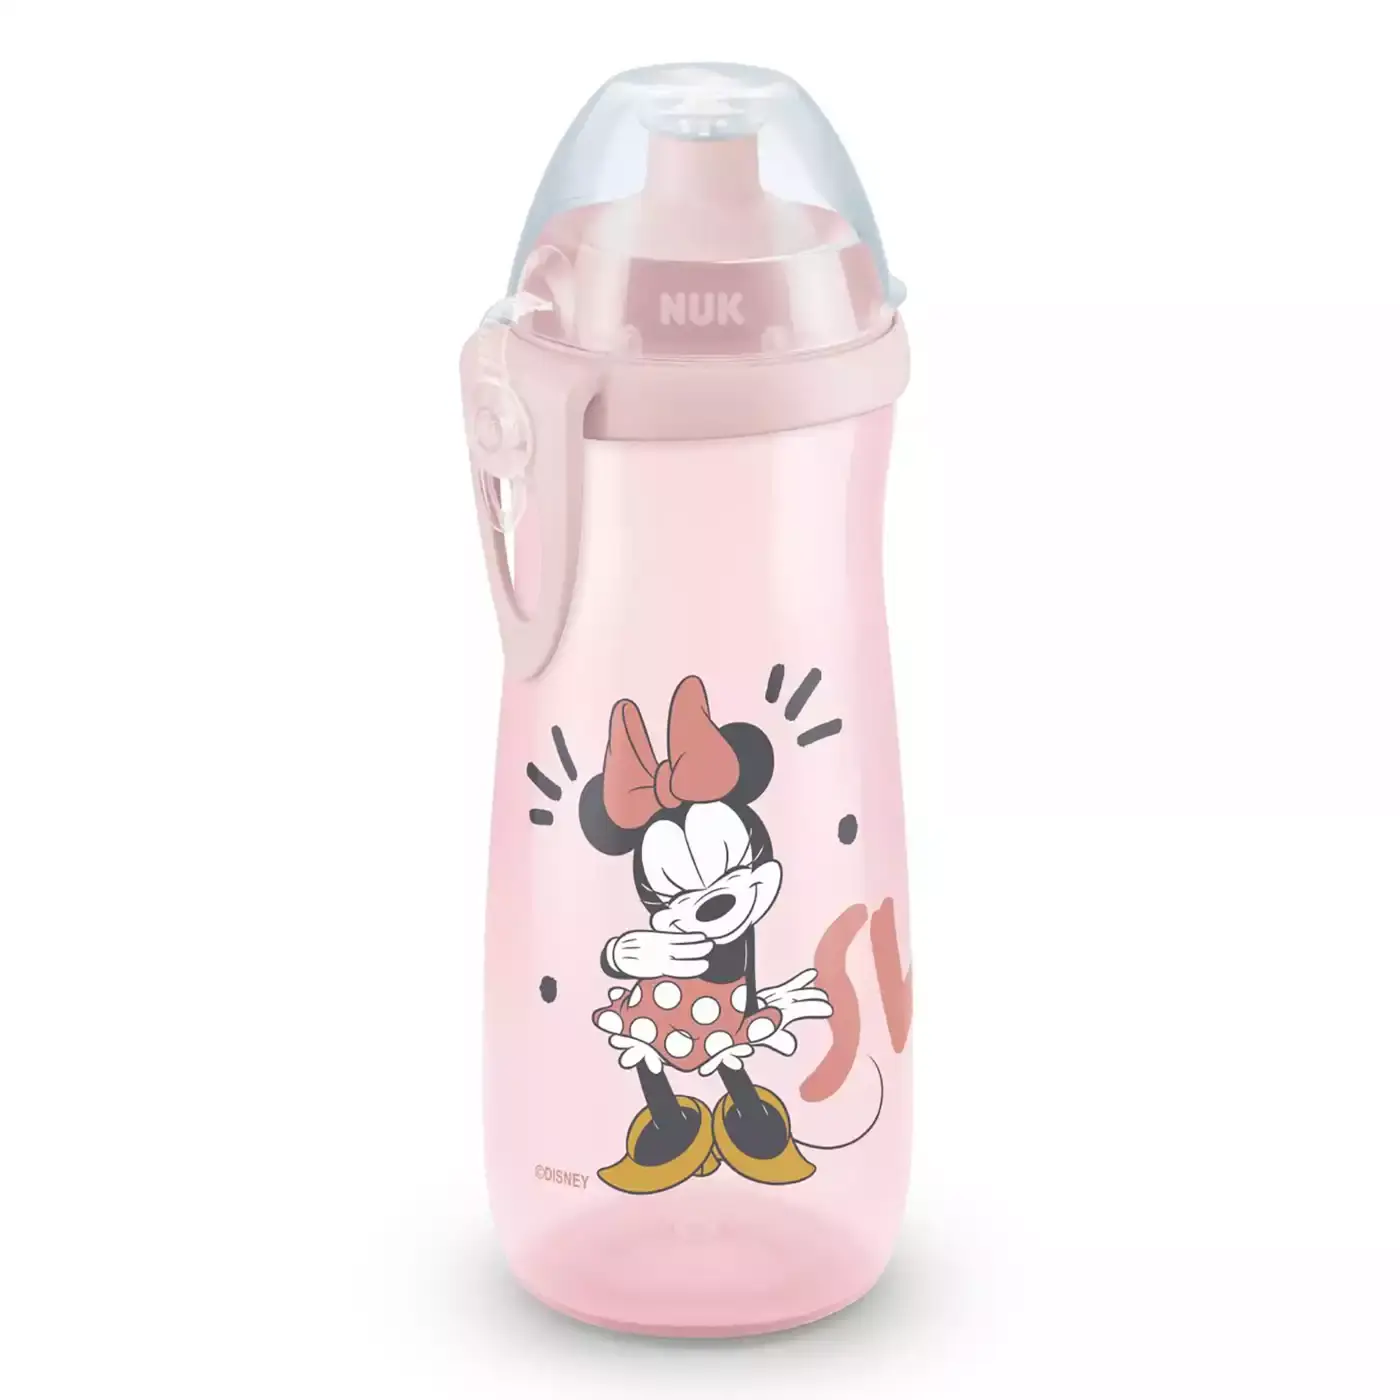 Sports Cup Minnie Mouse 450ml NUK Pink 2000581135403 3